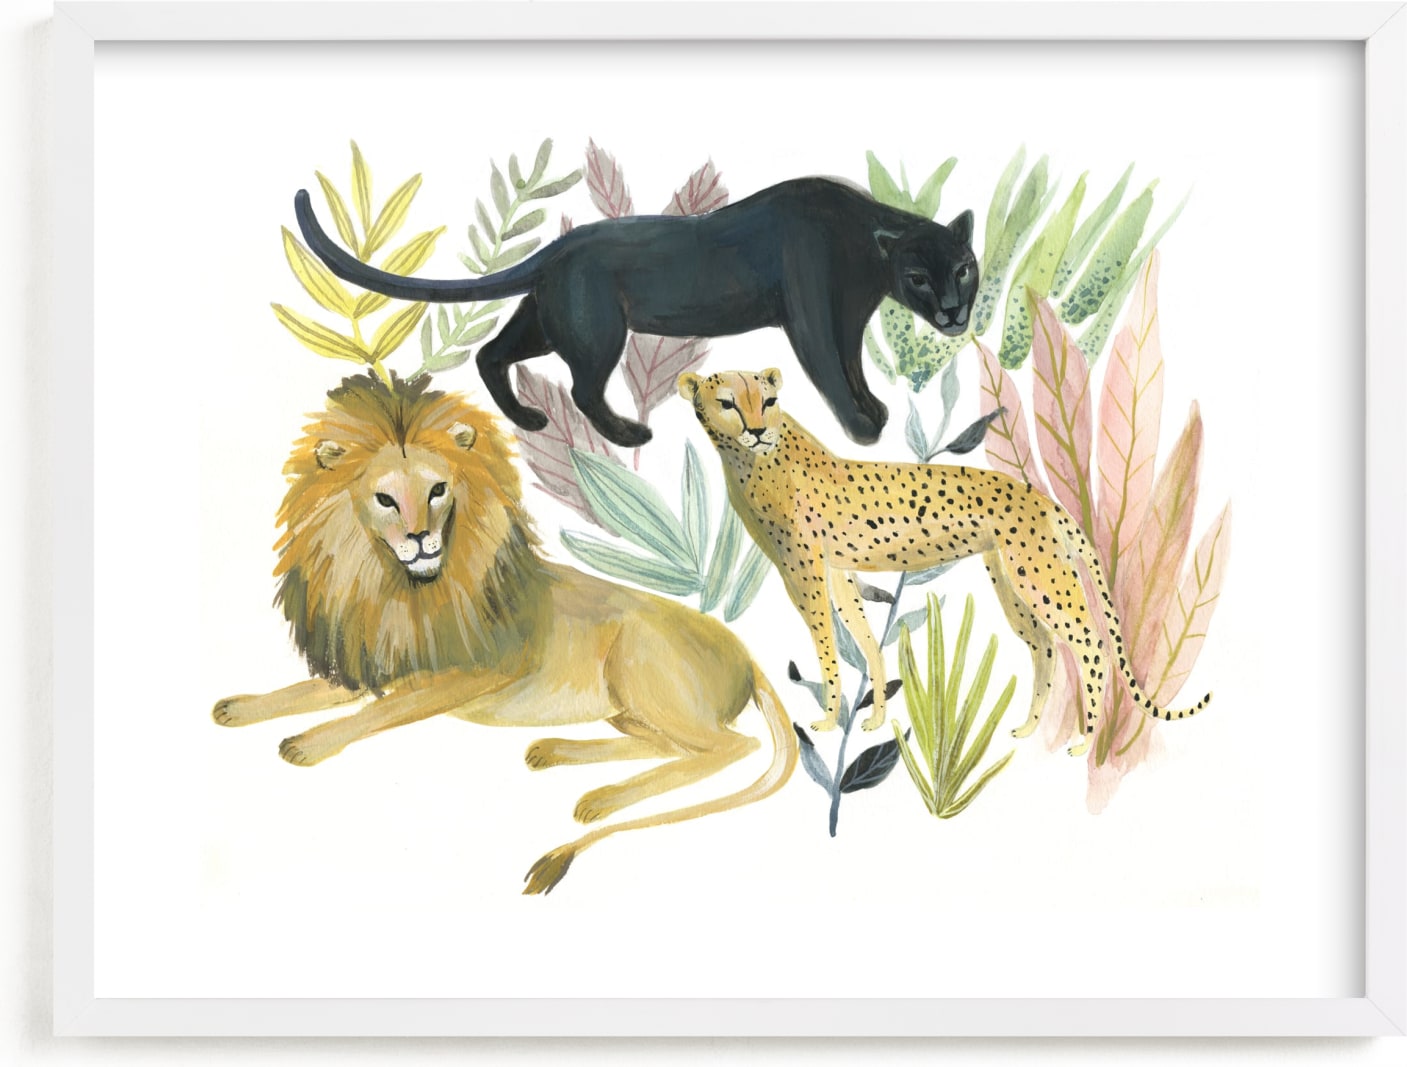 This is a colorful kids wall art by Emilie Simpson called Wild Cats.